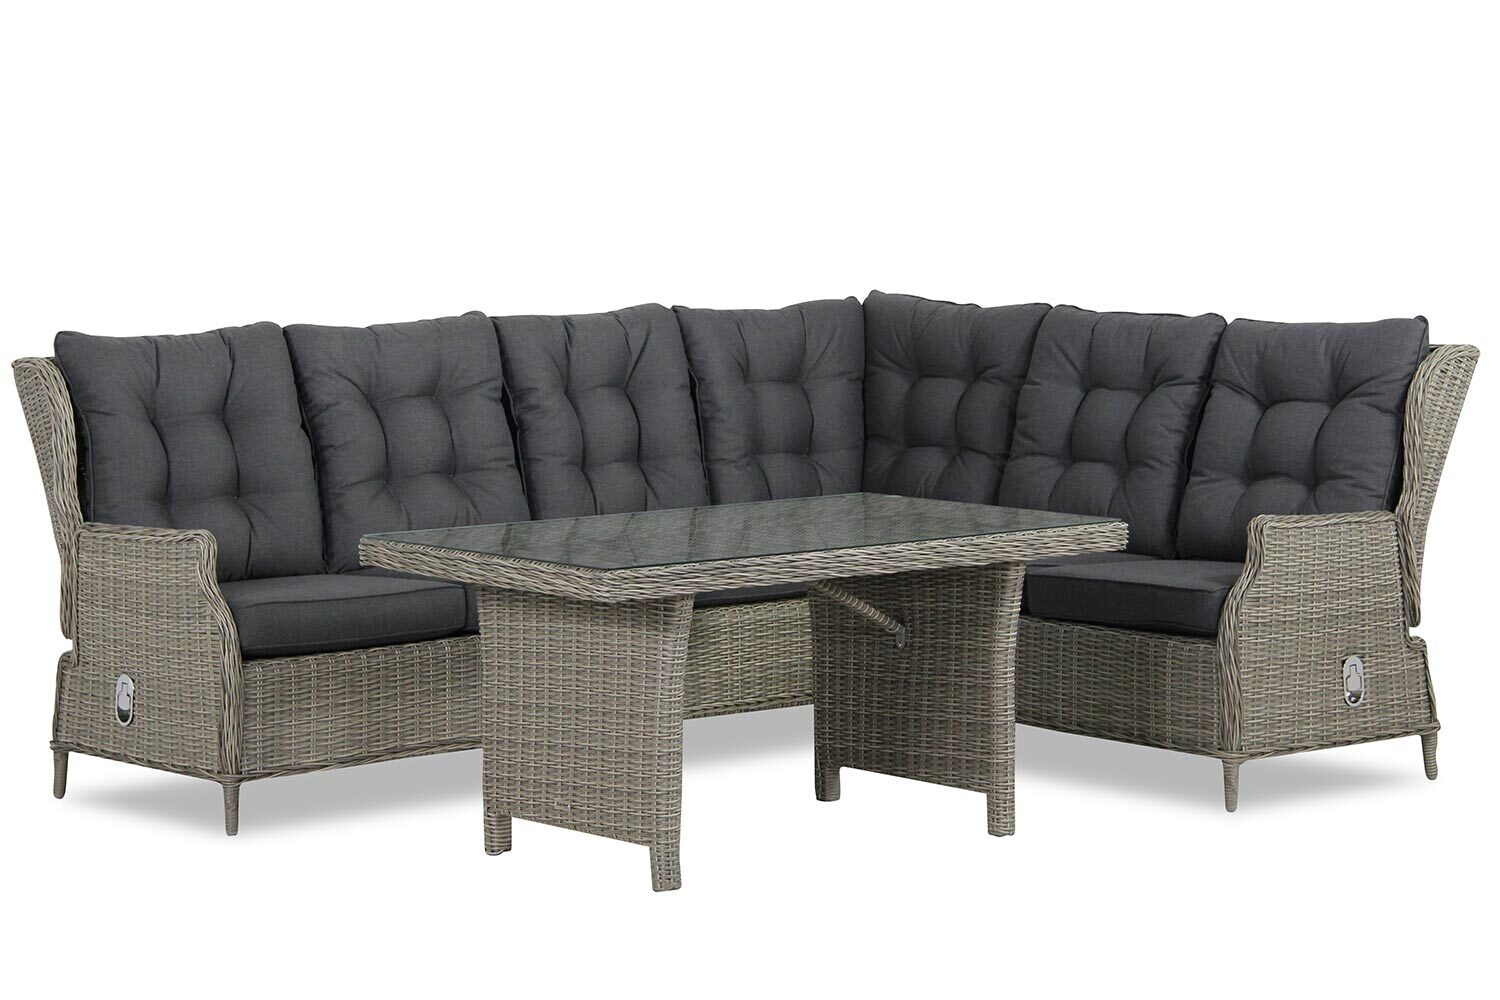 Garden Collections New Castle dining loungeset 5-delig - Tuinmeubelshop